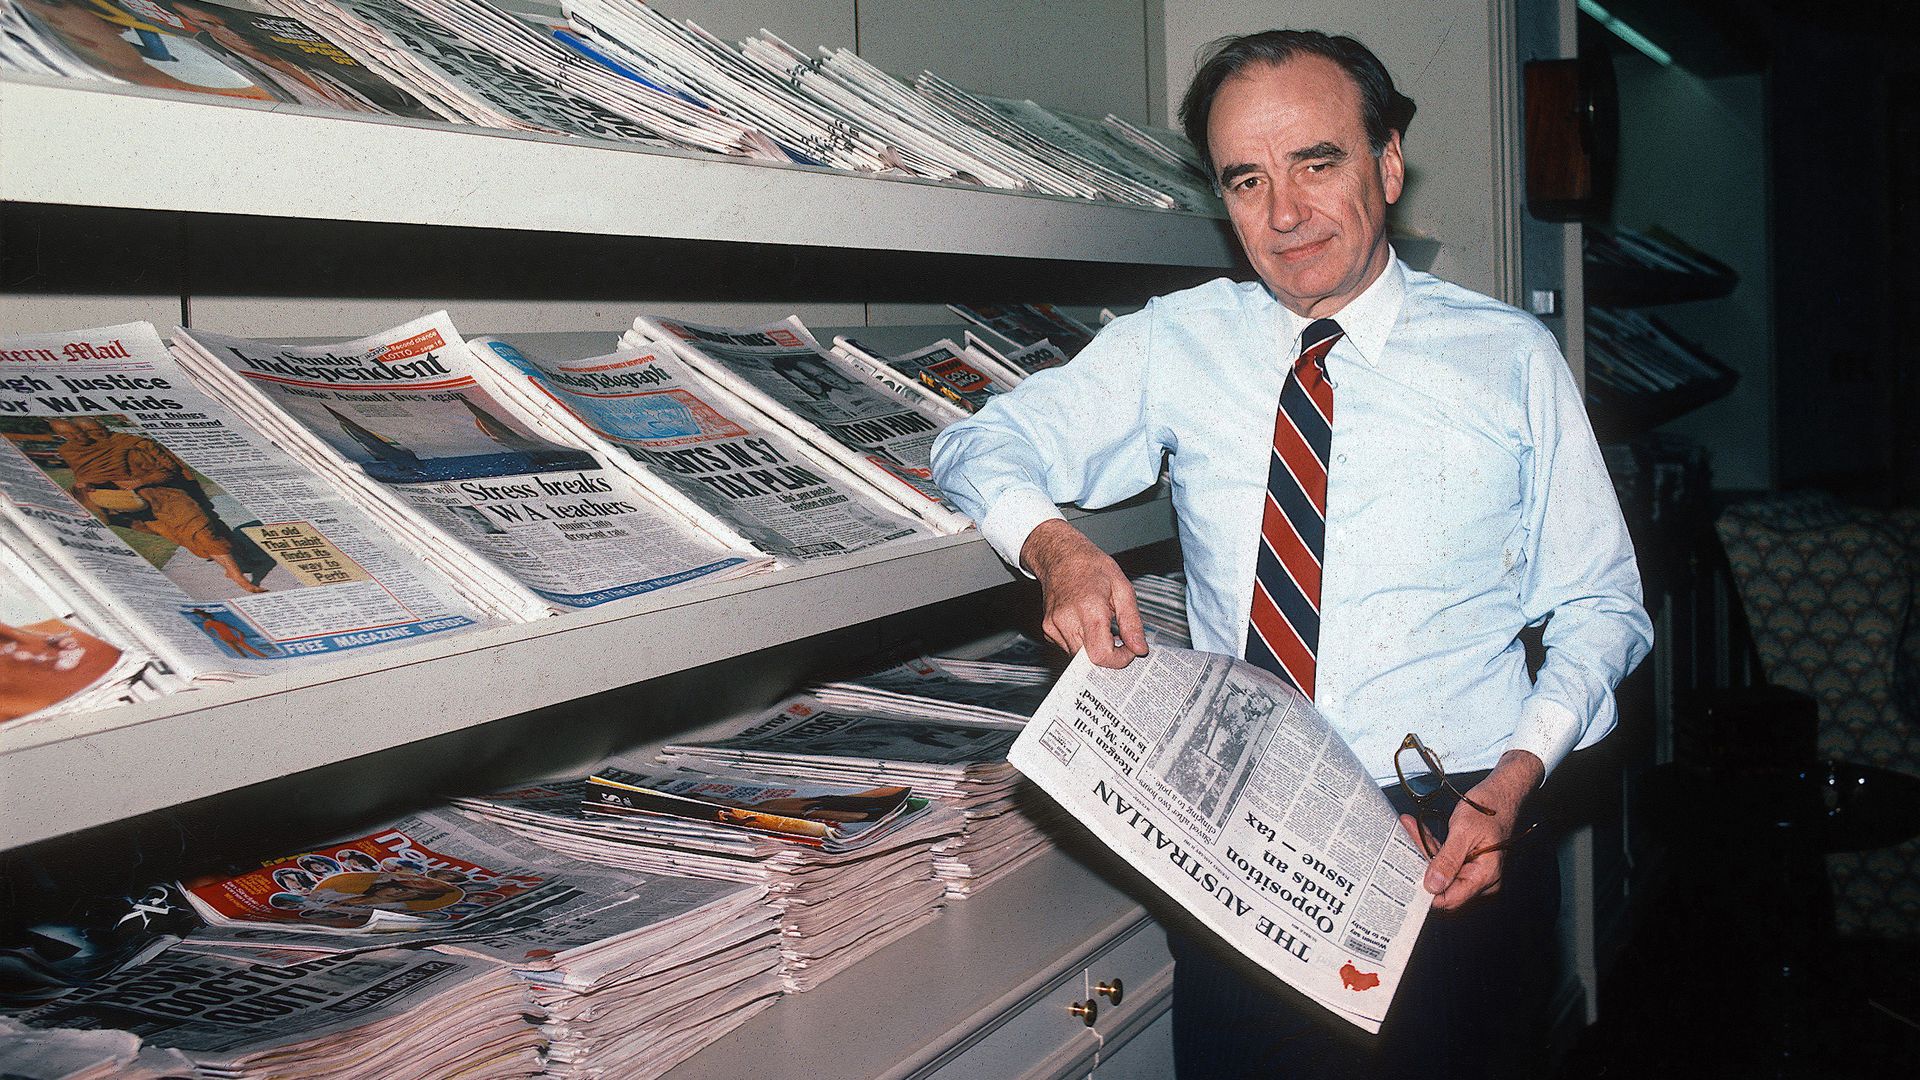 Portrait of Australian-born American media executive Rupert Murdoch as he poses, beside a display rack of periodicals he owns, in his office at the New York Post.